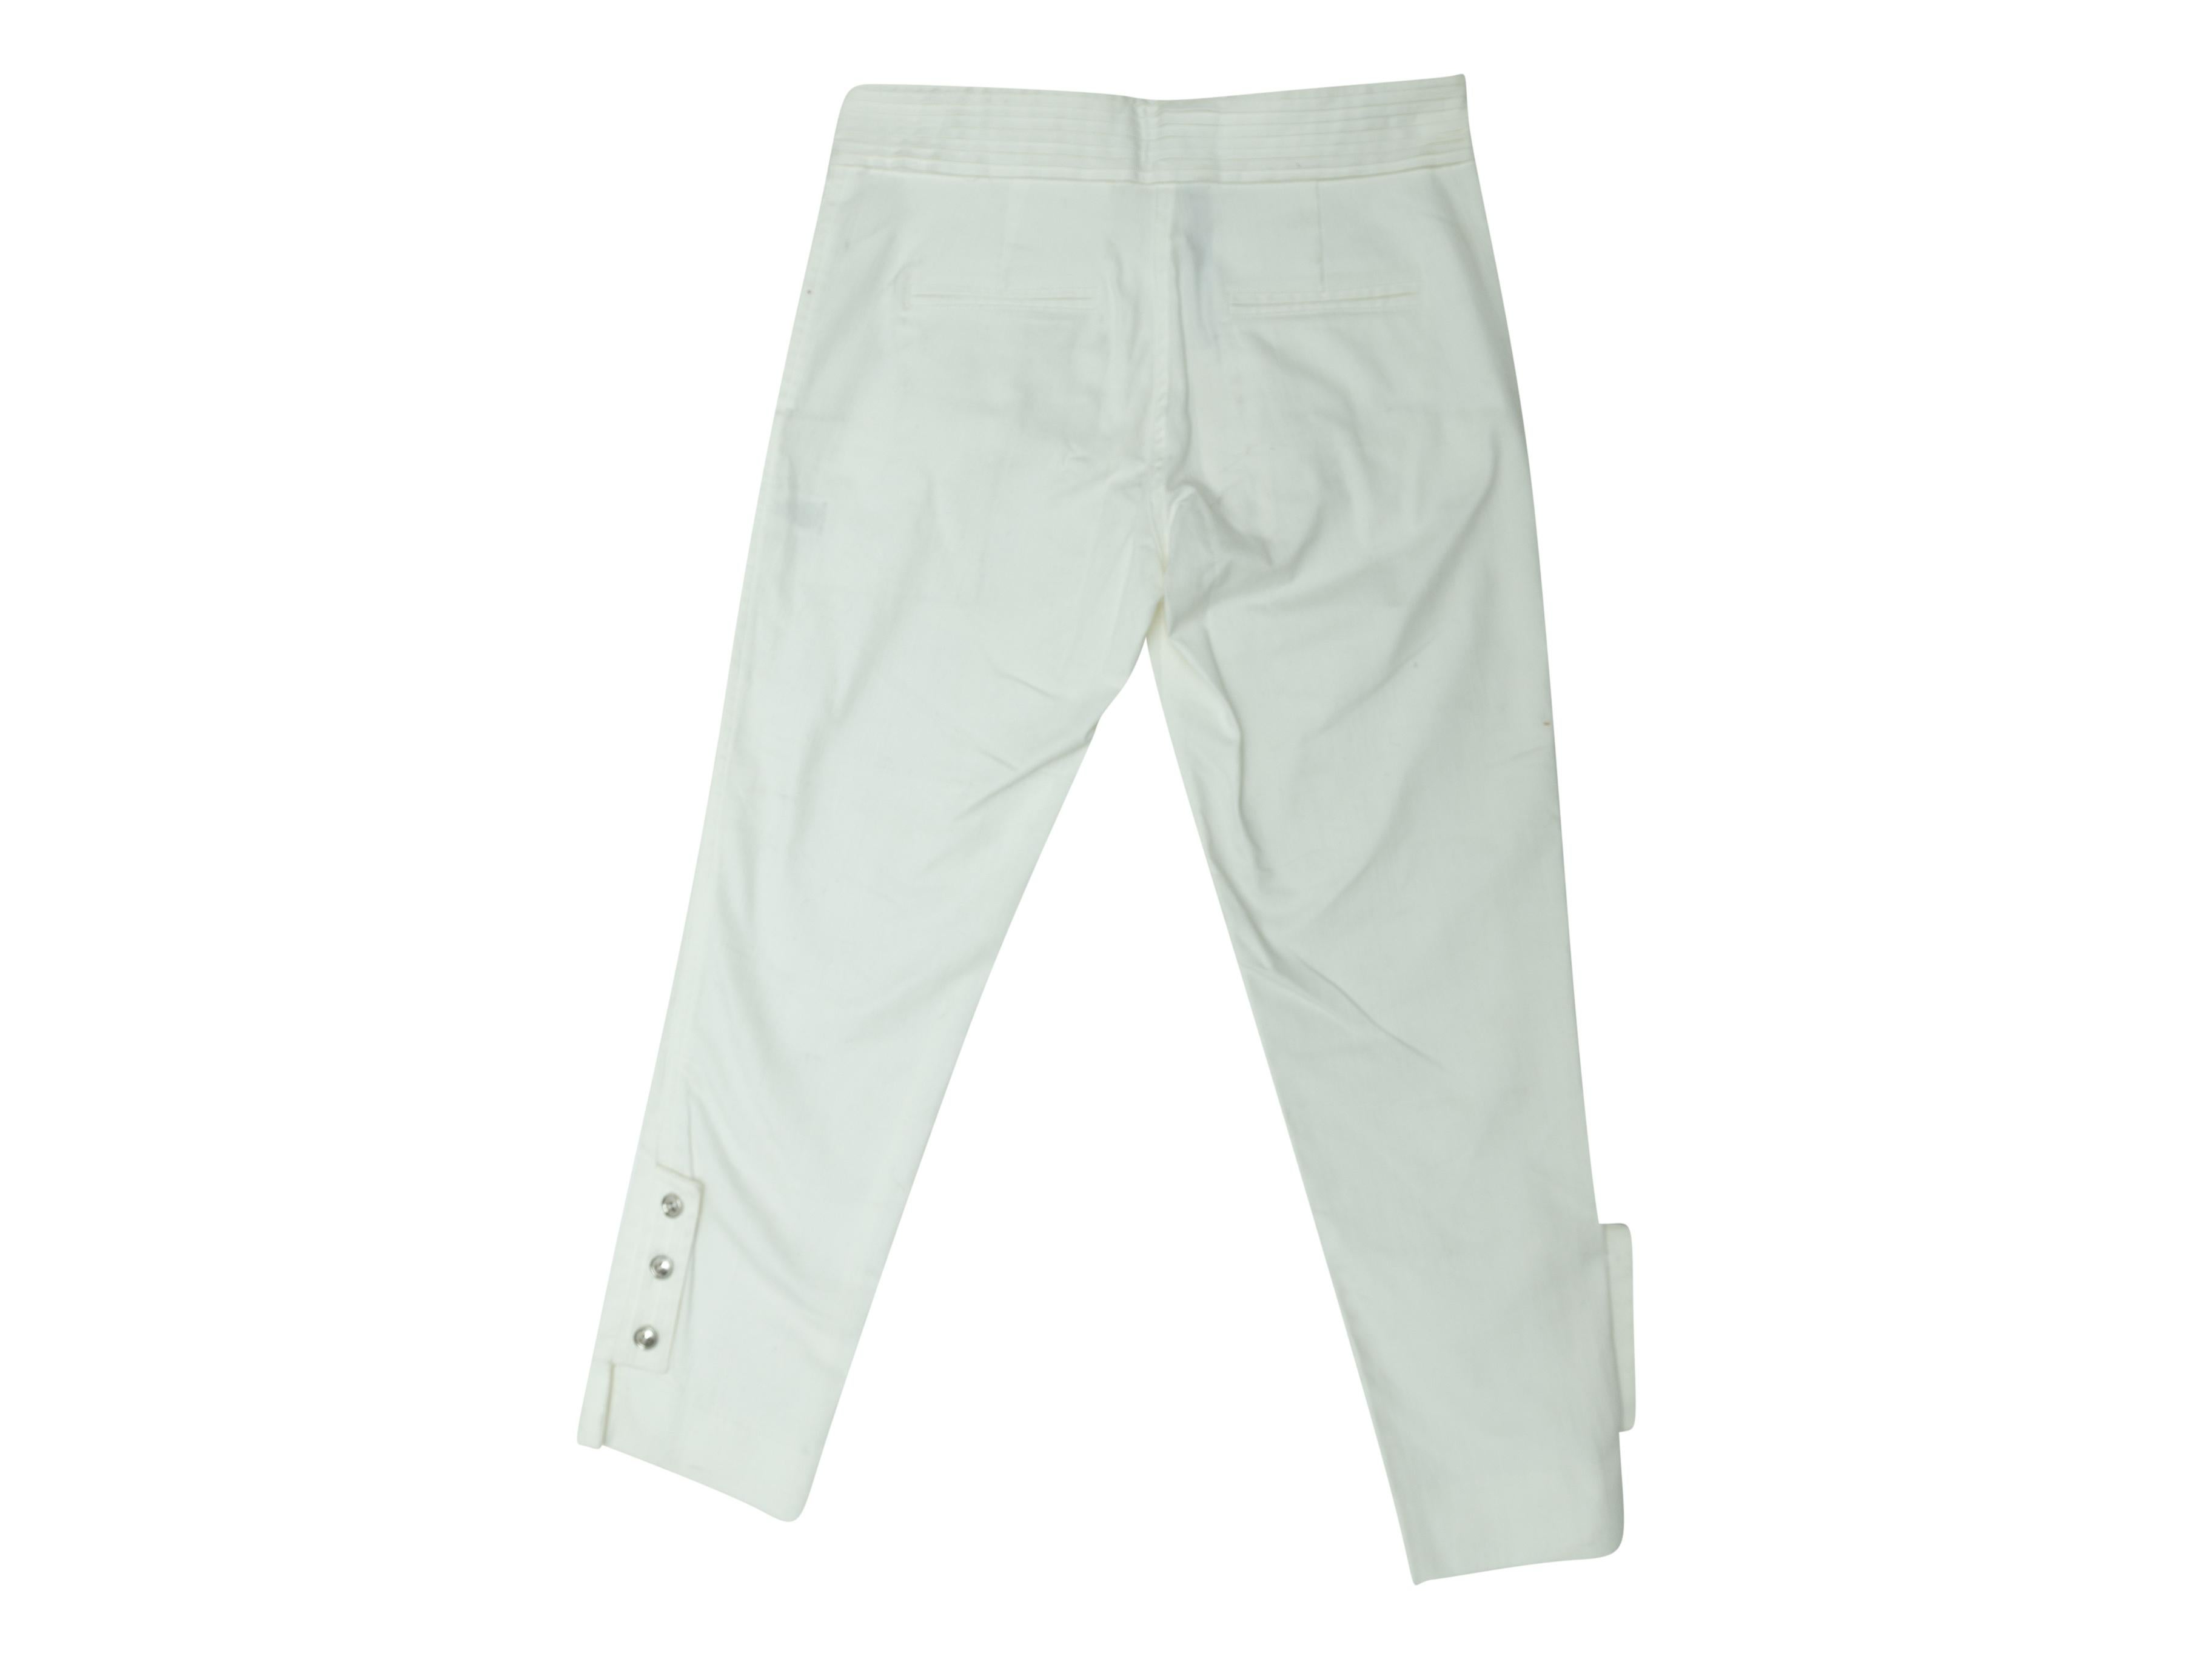 Product details: White straight-leg pants by Adam Lippes. Four pockets. Silver-tone button accents at leg openings. Zip closure at front. 25